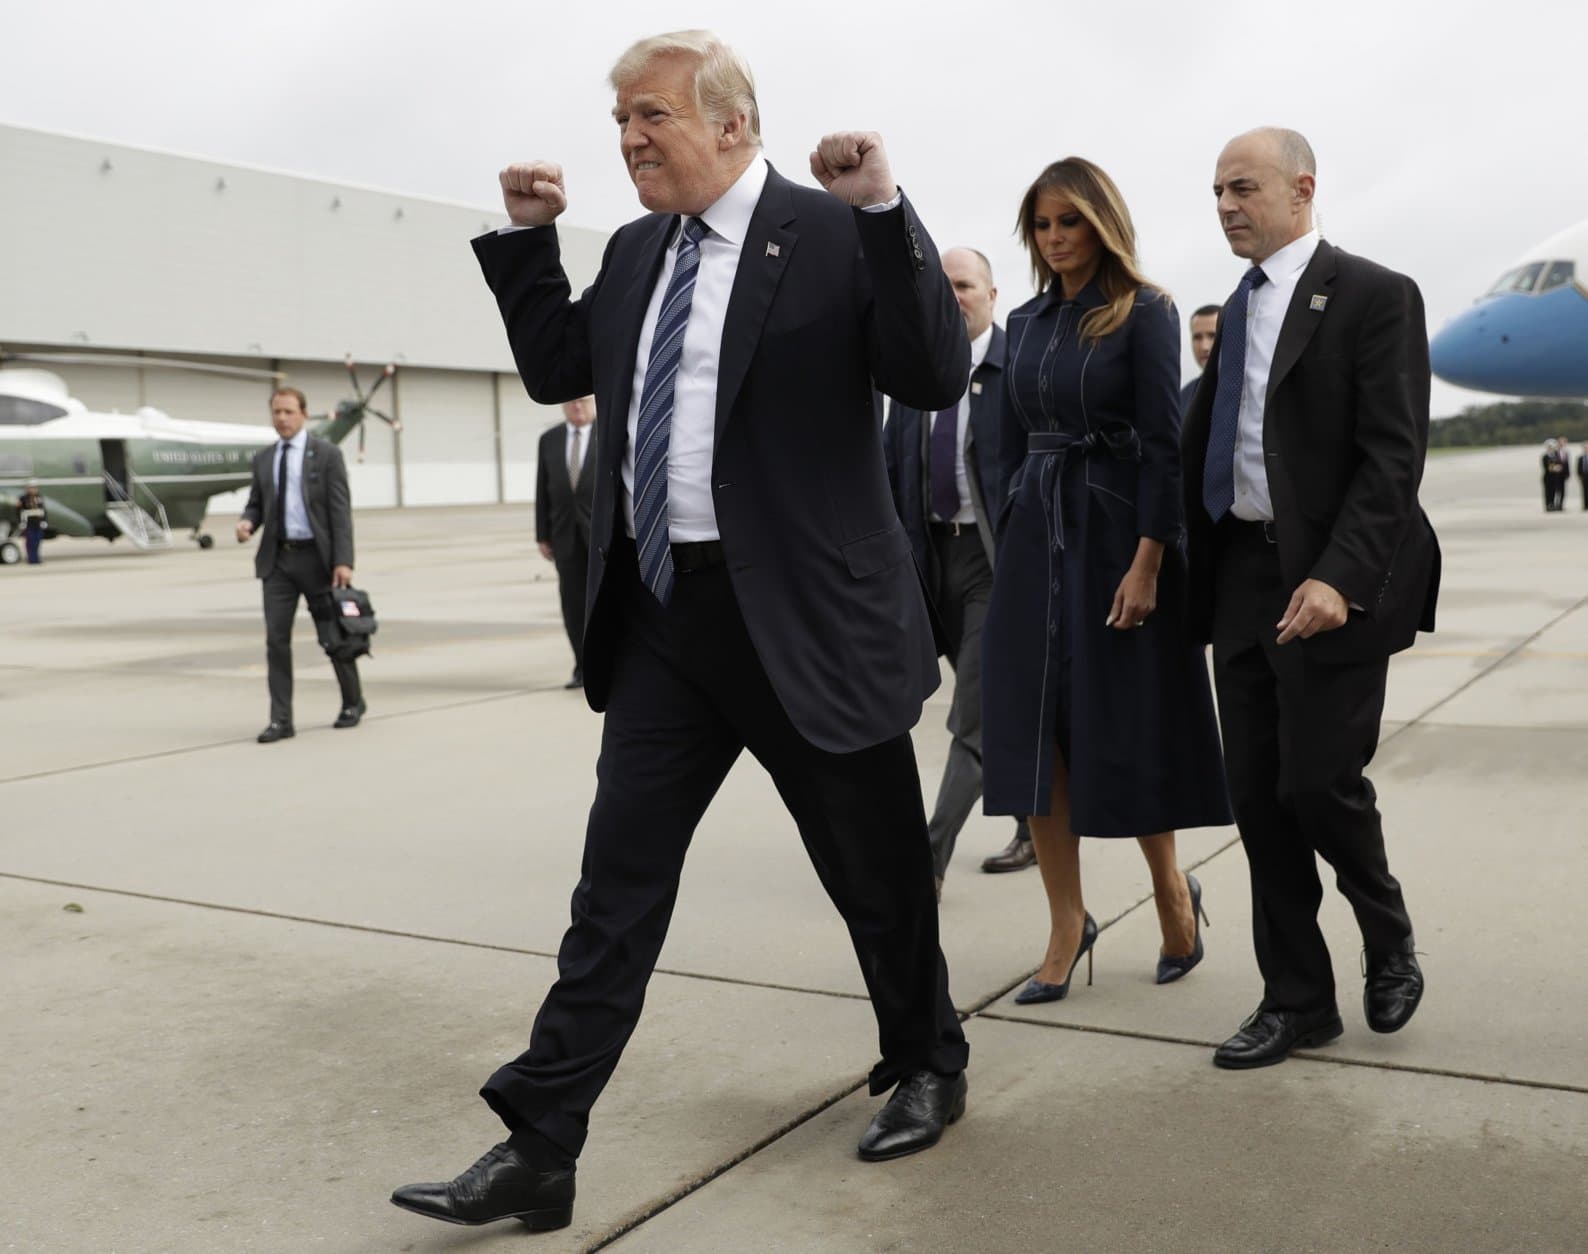 President Donald Trump and first lady Melania Trump arrive at Johnstown, Pa., on Sept. 11, 2018, before Trump's speech during the September 11 Flight 93 Memorial Service in Shanksville, Pa. (AP Photo/Evan Vucci)